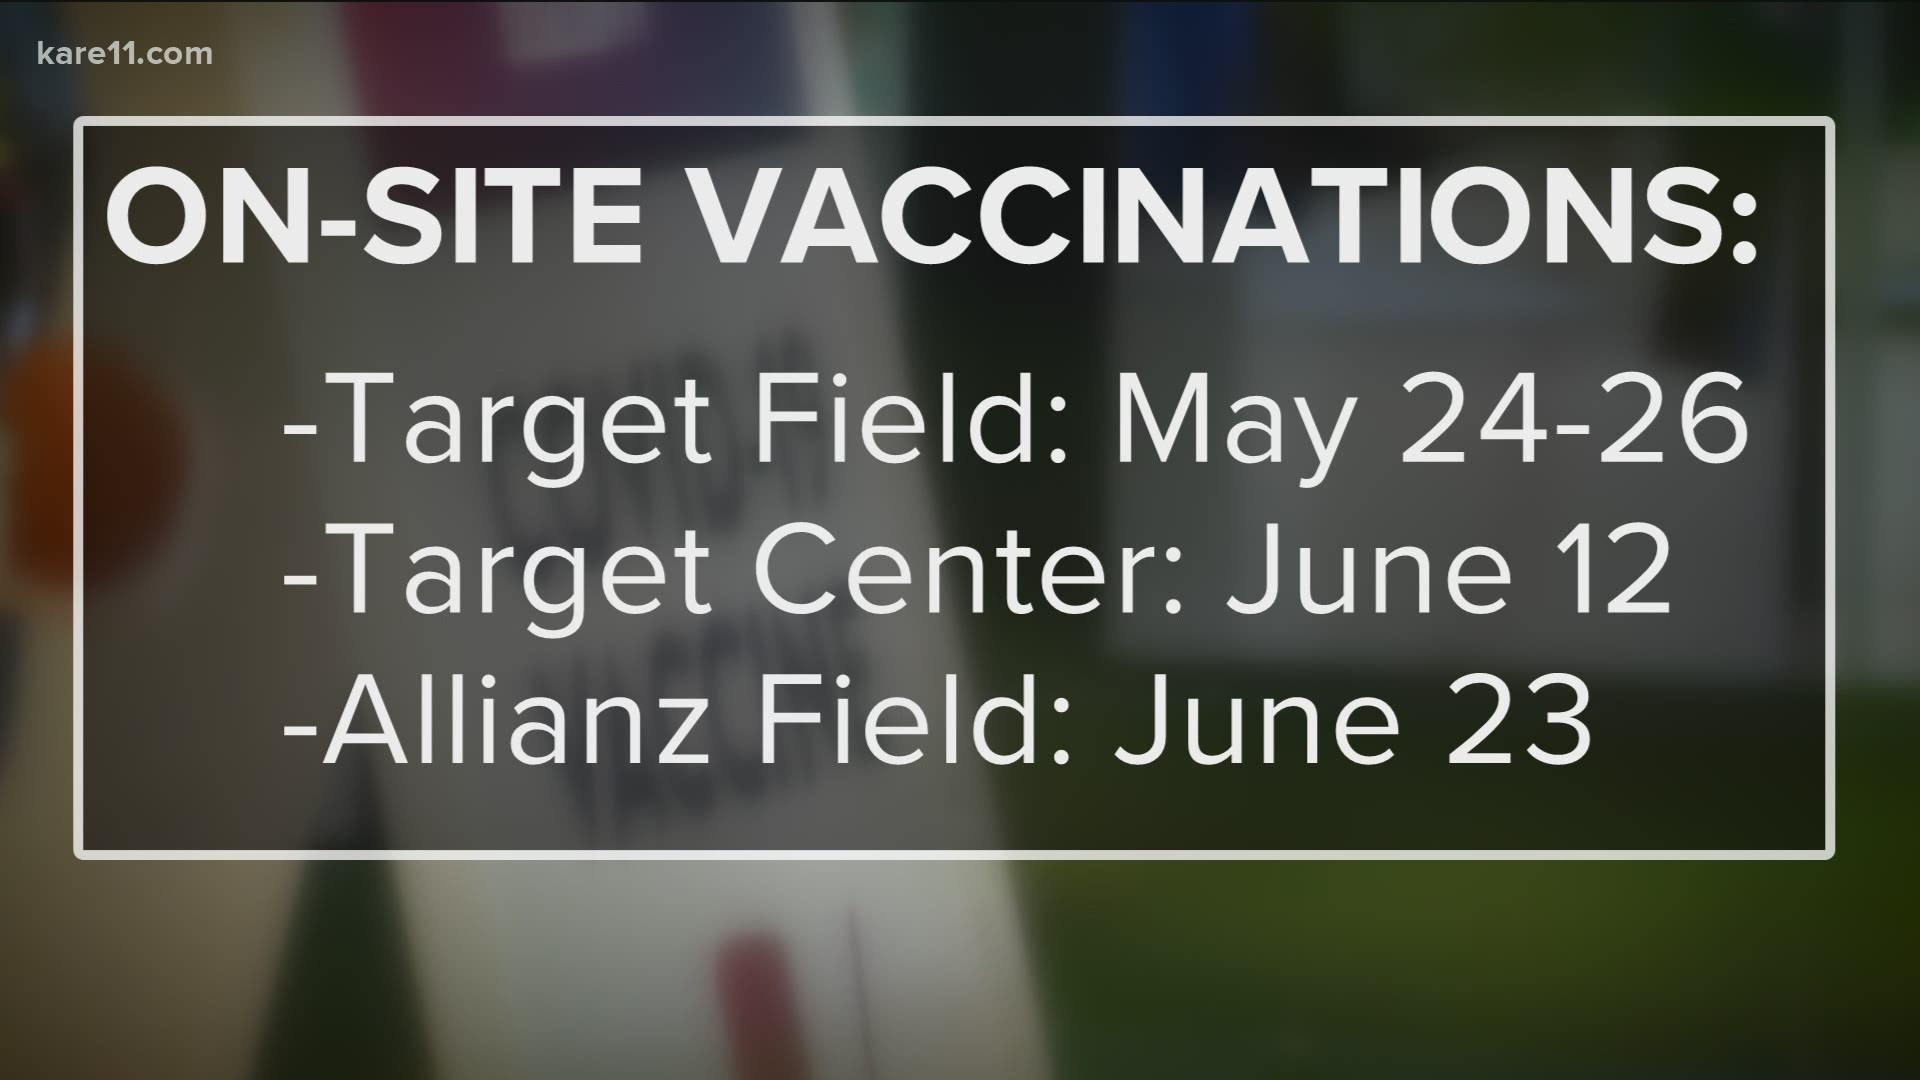 This is part of the state's push to get more people vaccinated